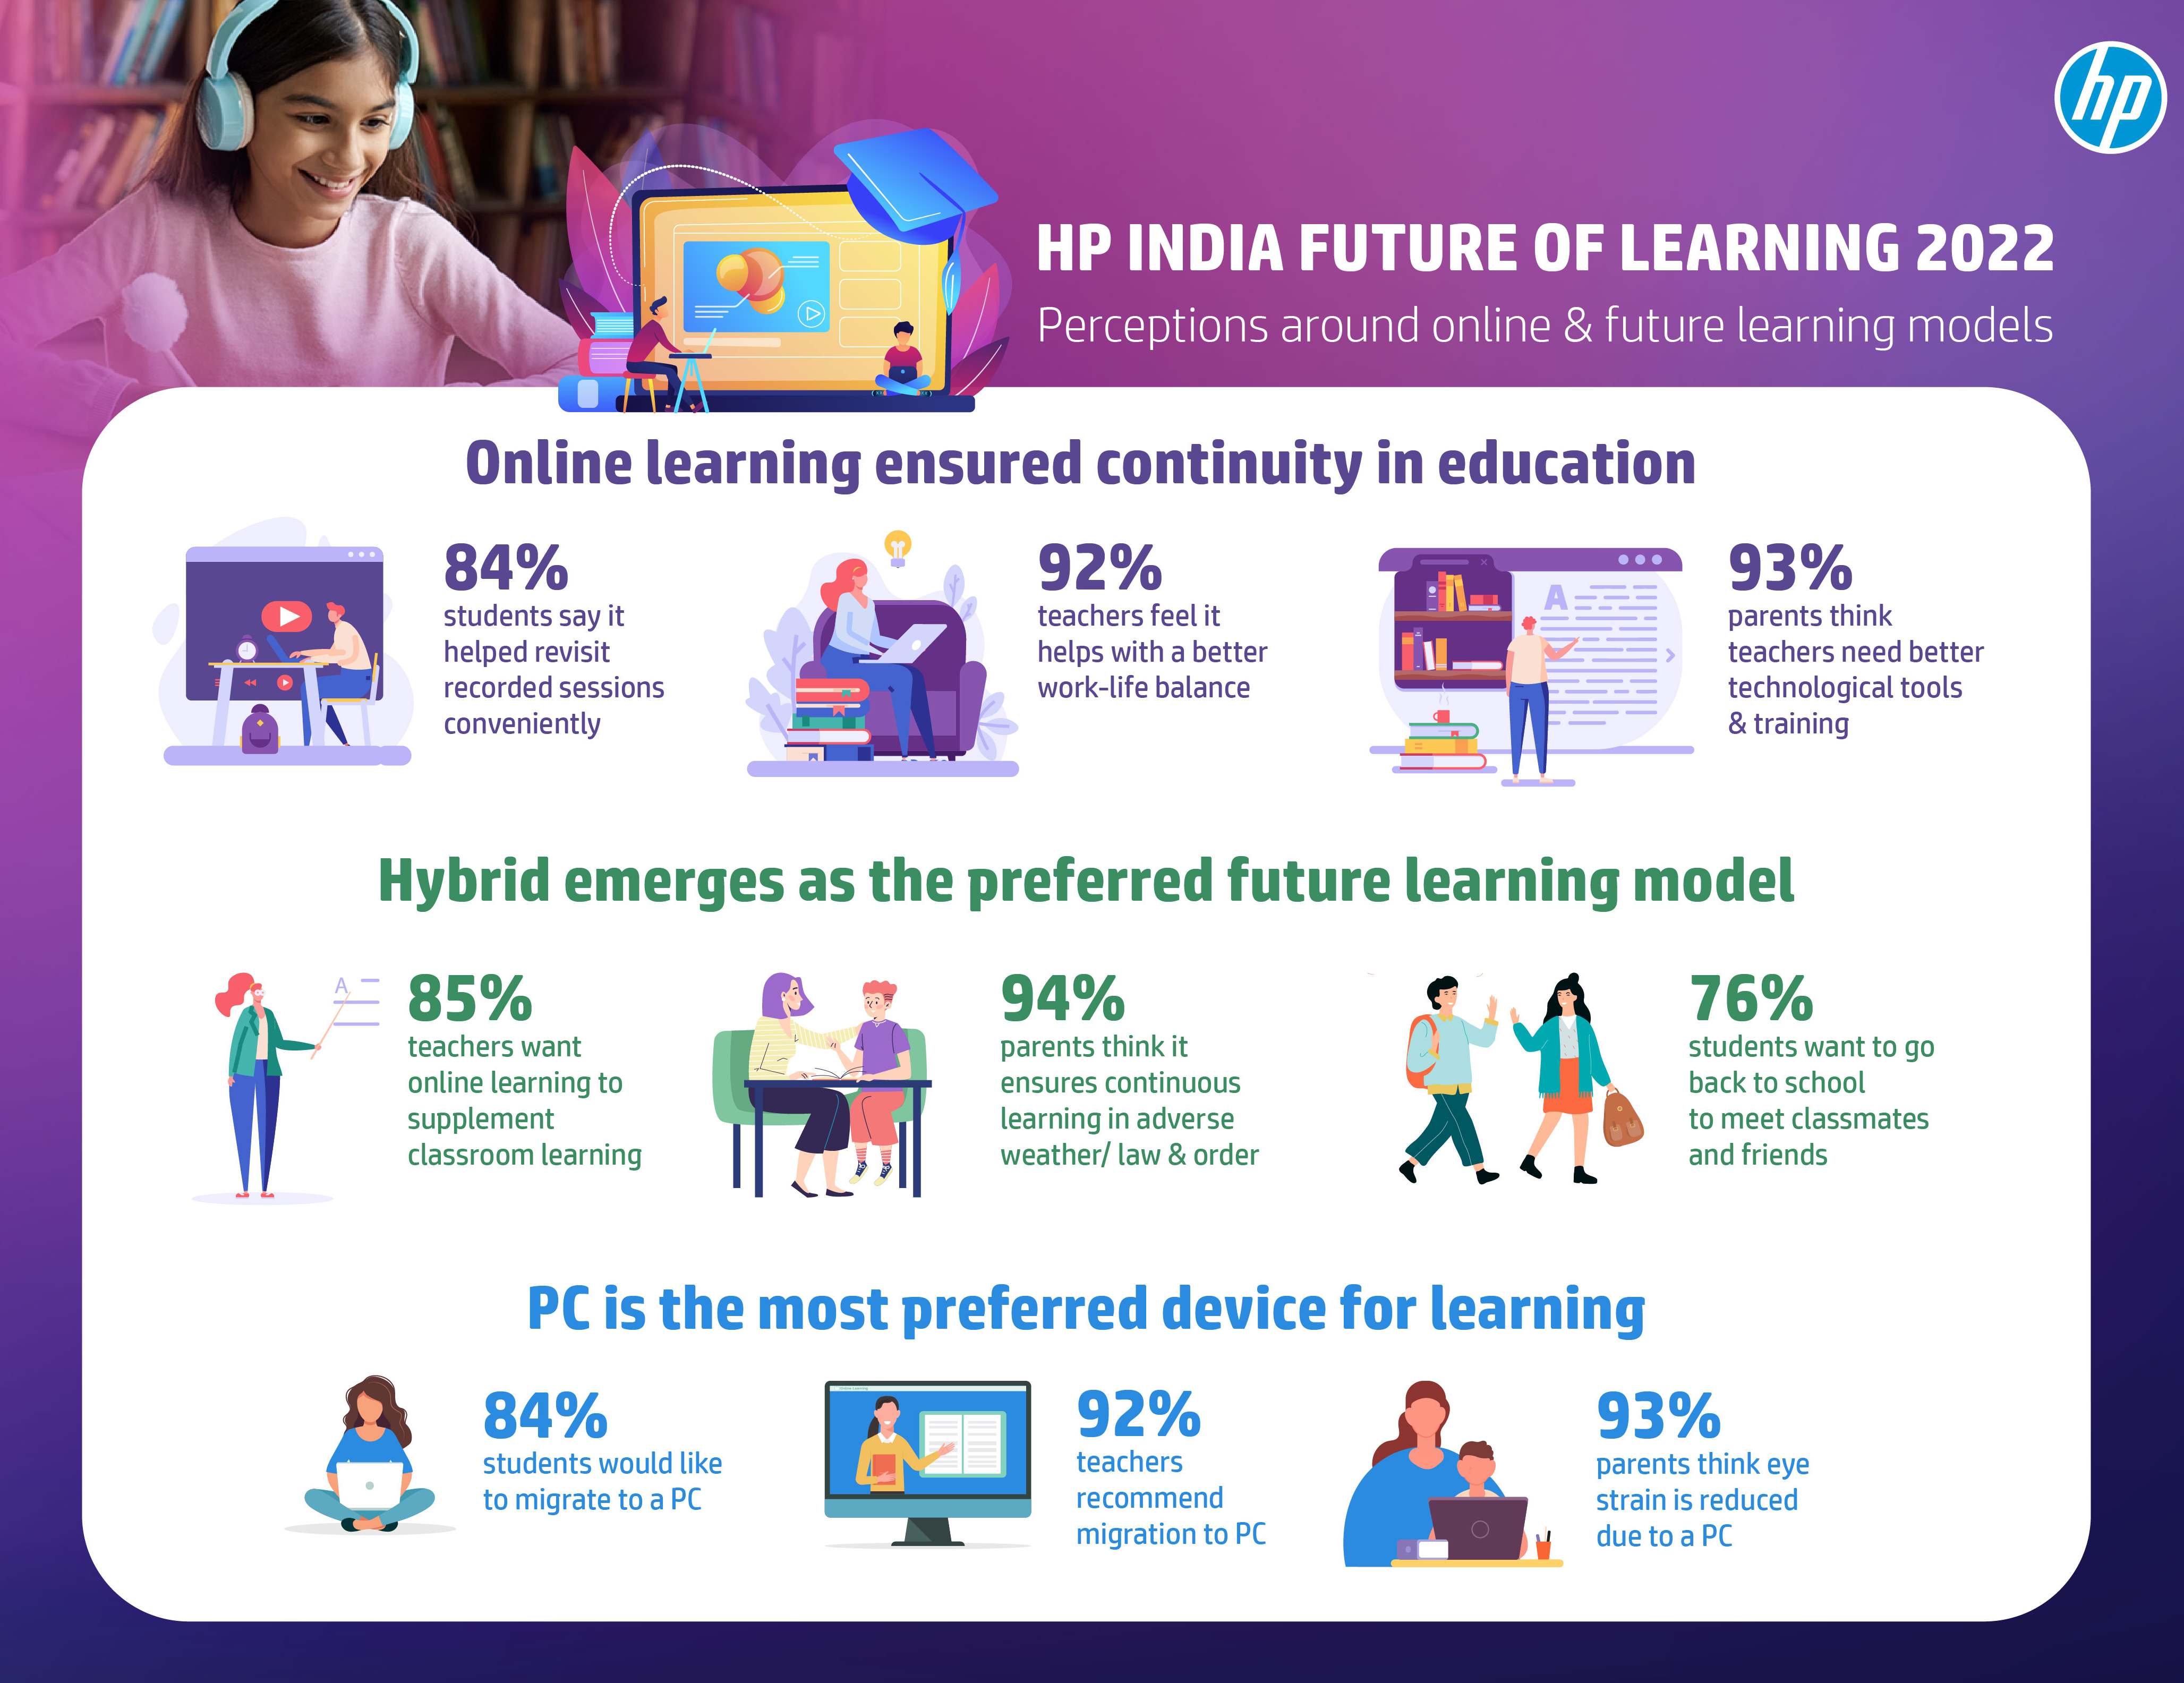 HP India Future of Learning Study 2022: Hybrid emerges as the most preferred learning model